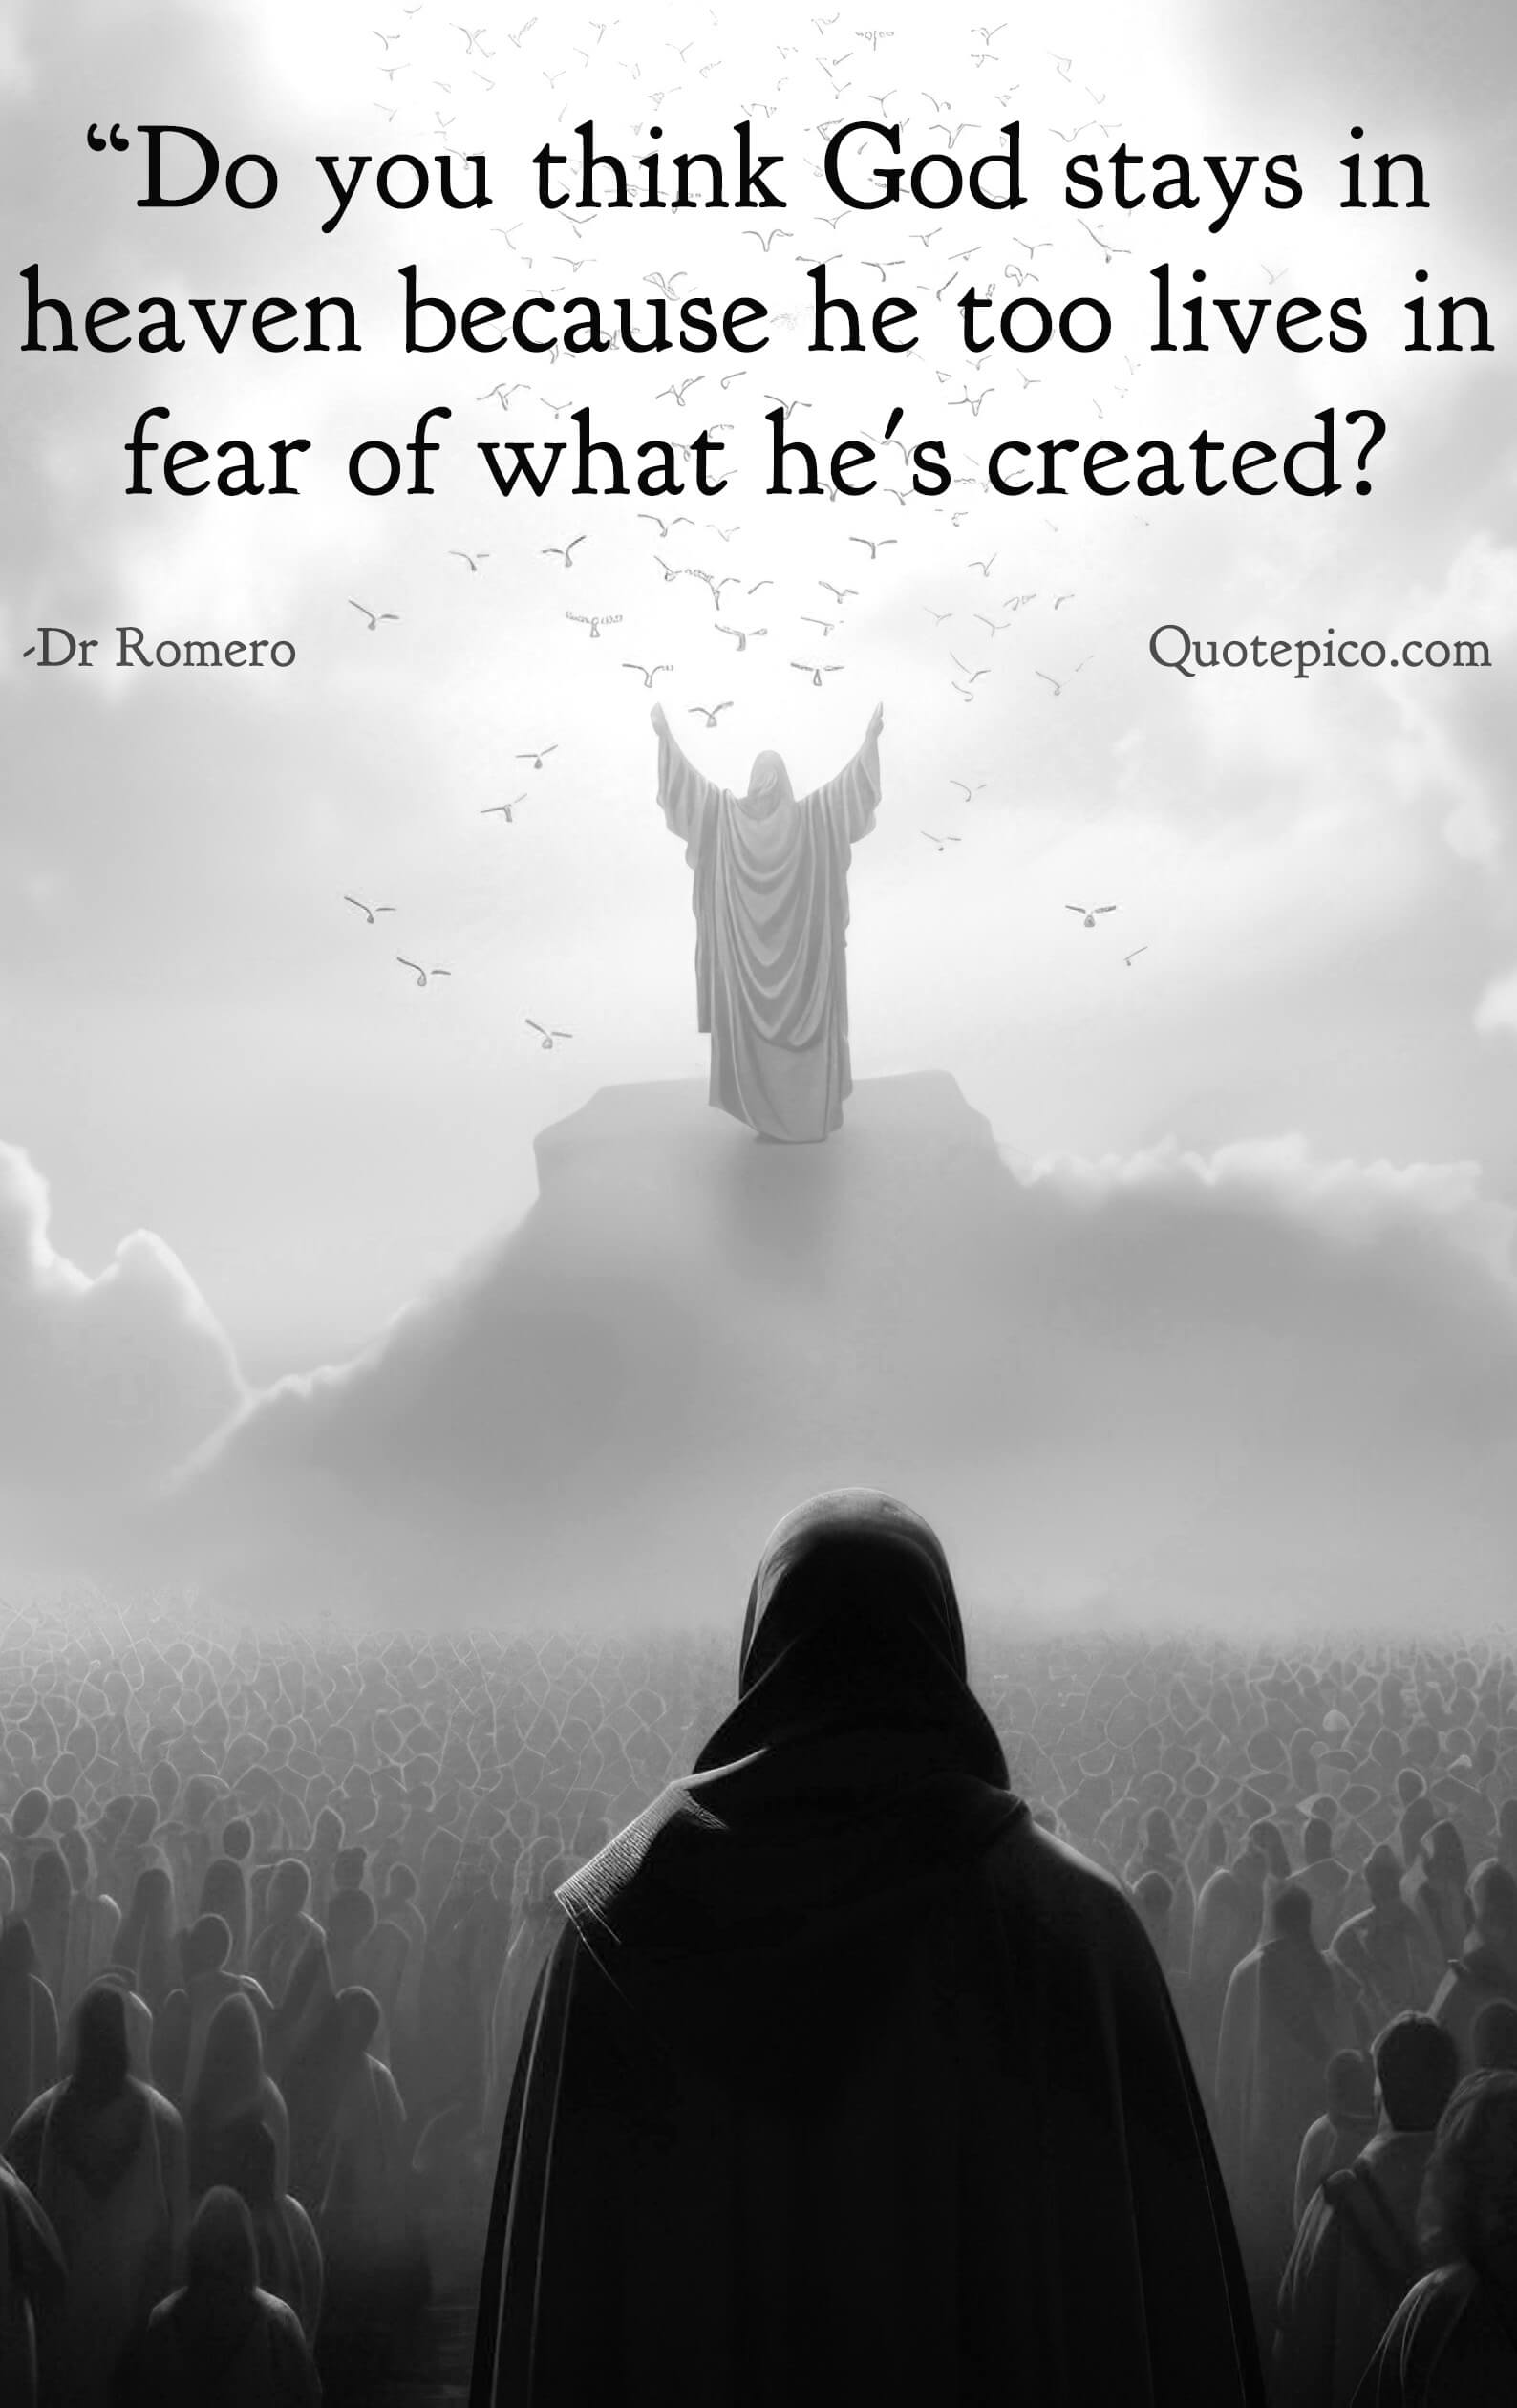 This is why god lives in heaven; he is afraid of what he has